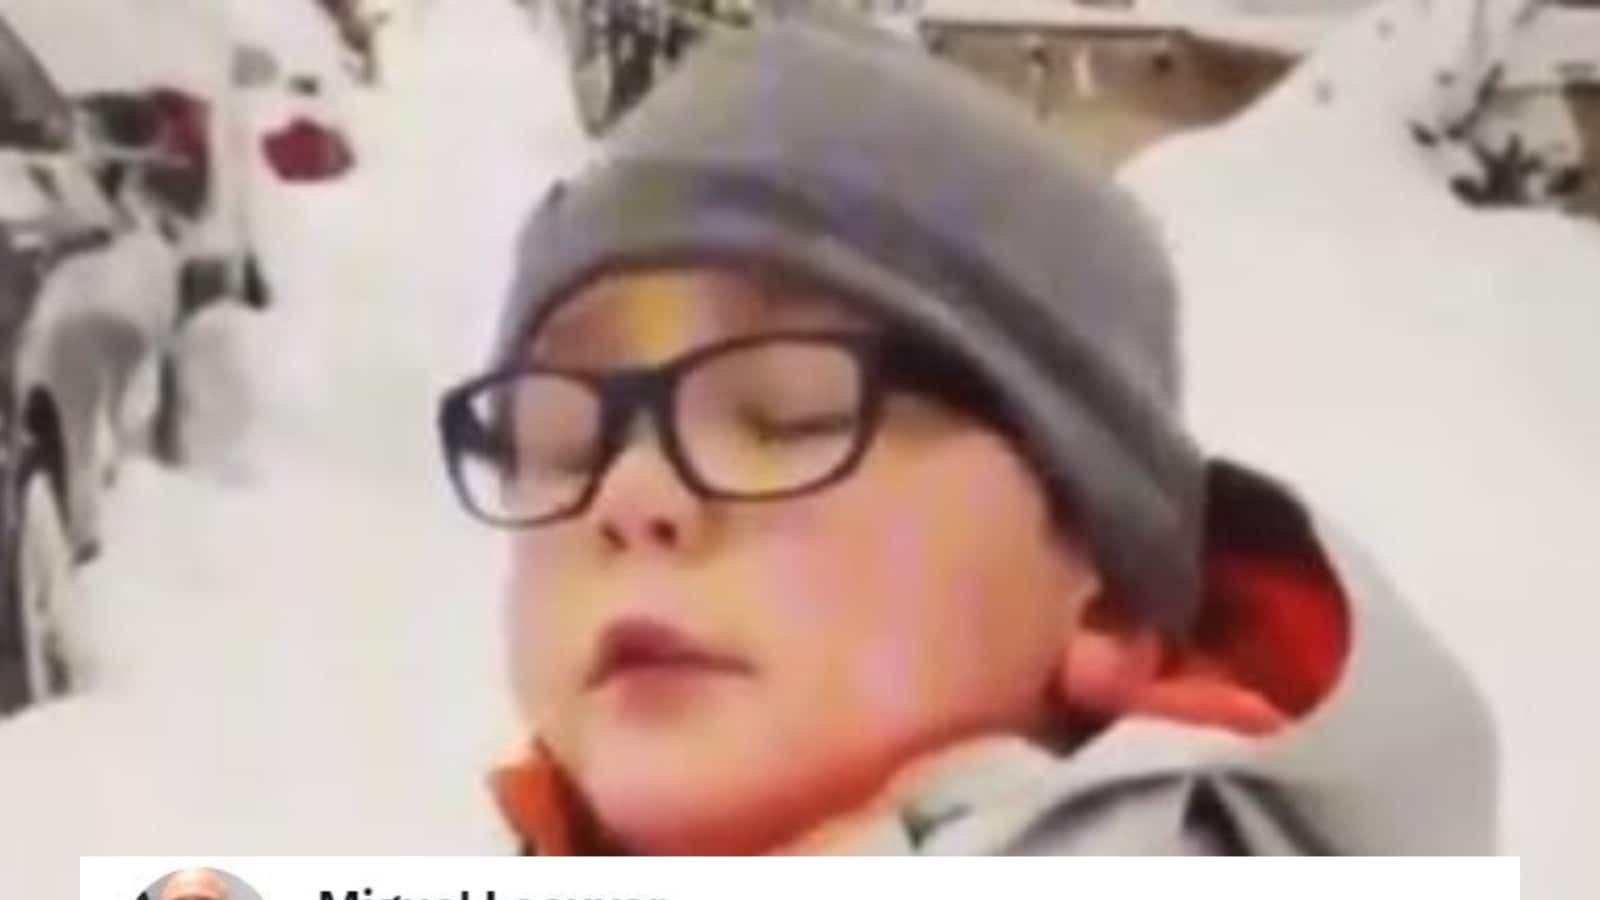 'Exhausted' Toronto Kid Missing School to Shovel Snow is Everyone's 2022 Mood